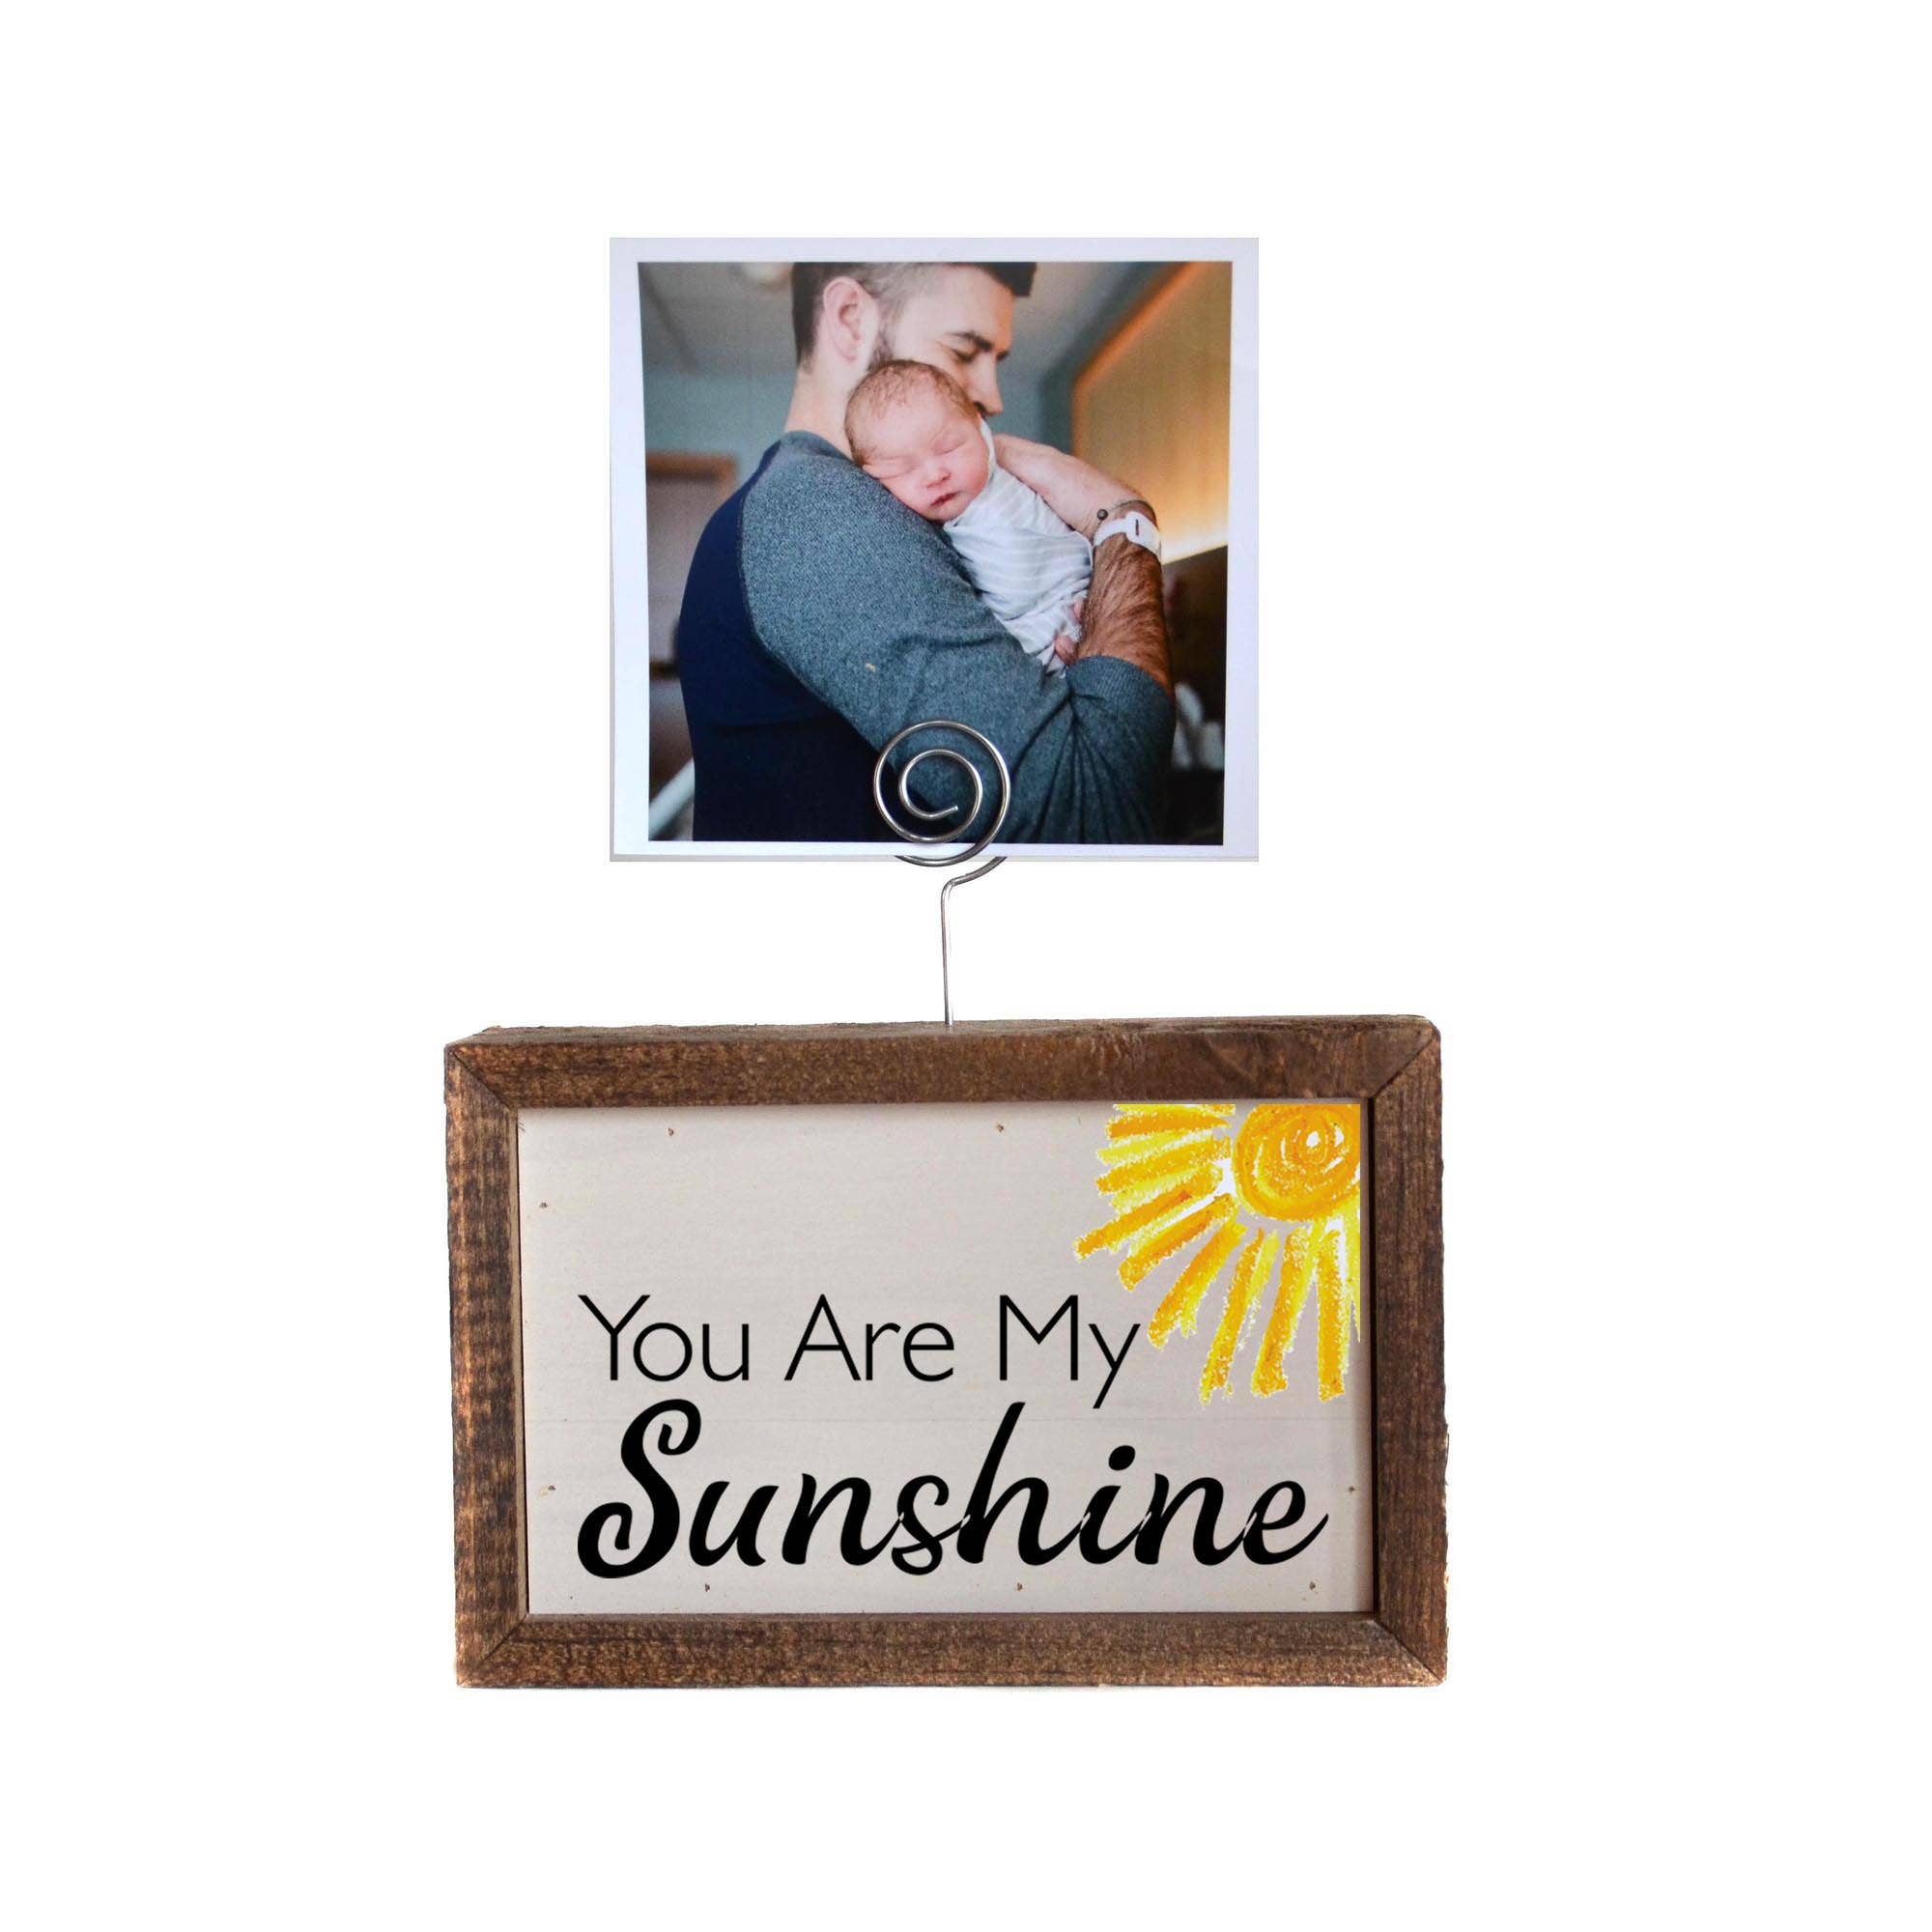 You Are My Sunshine Tabletop Picture Frame Block